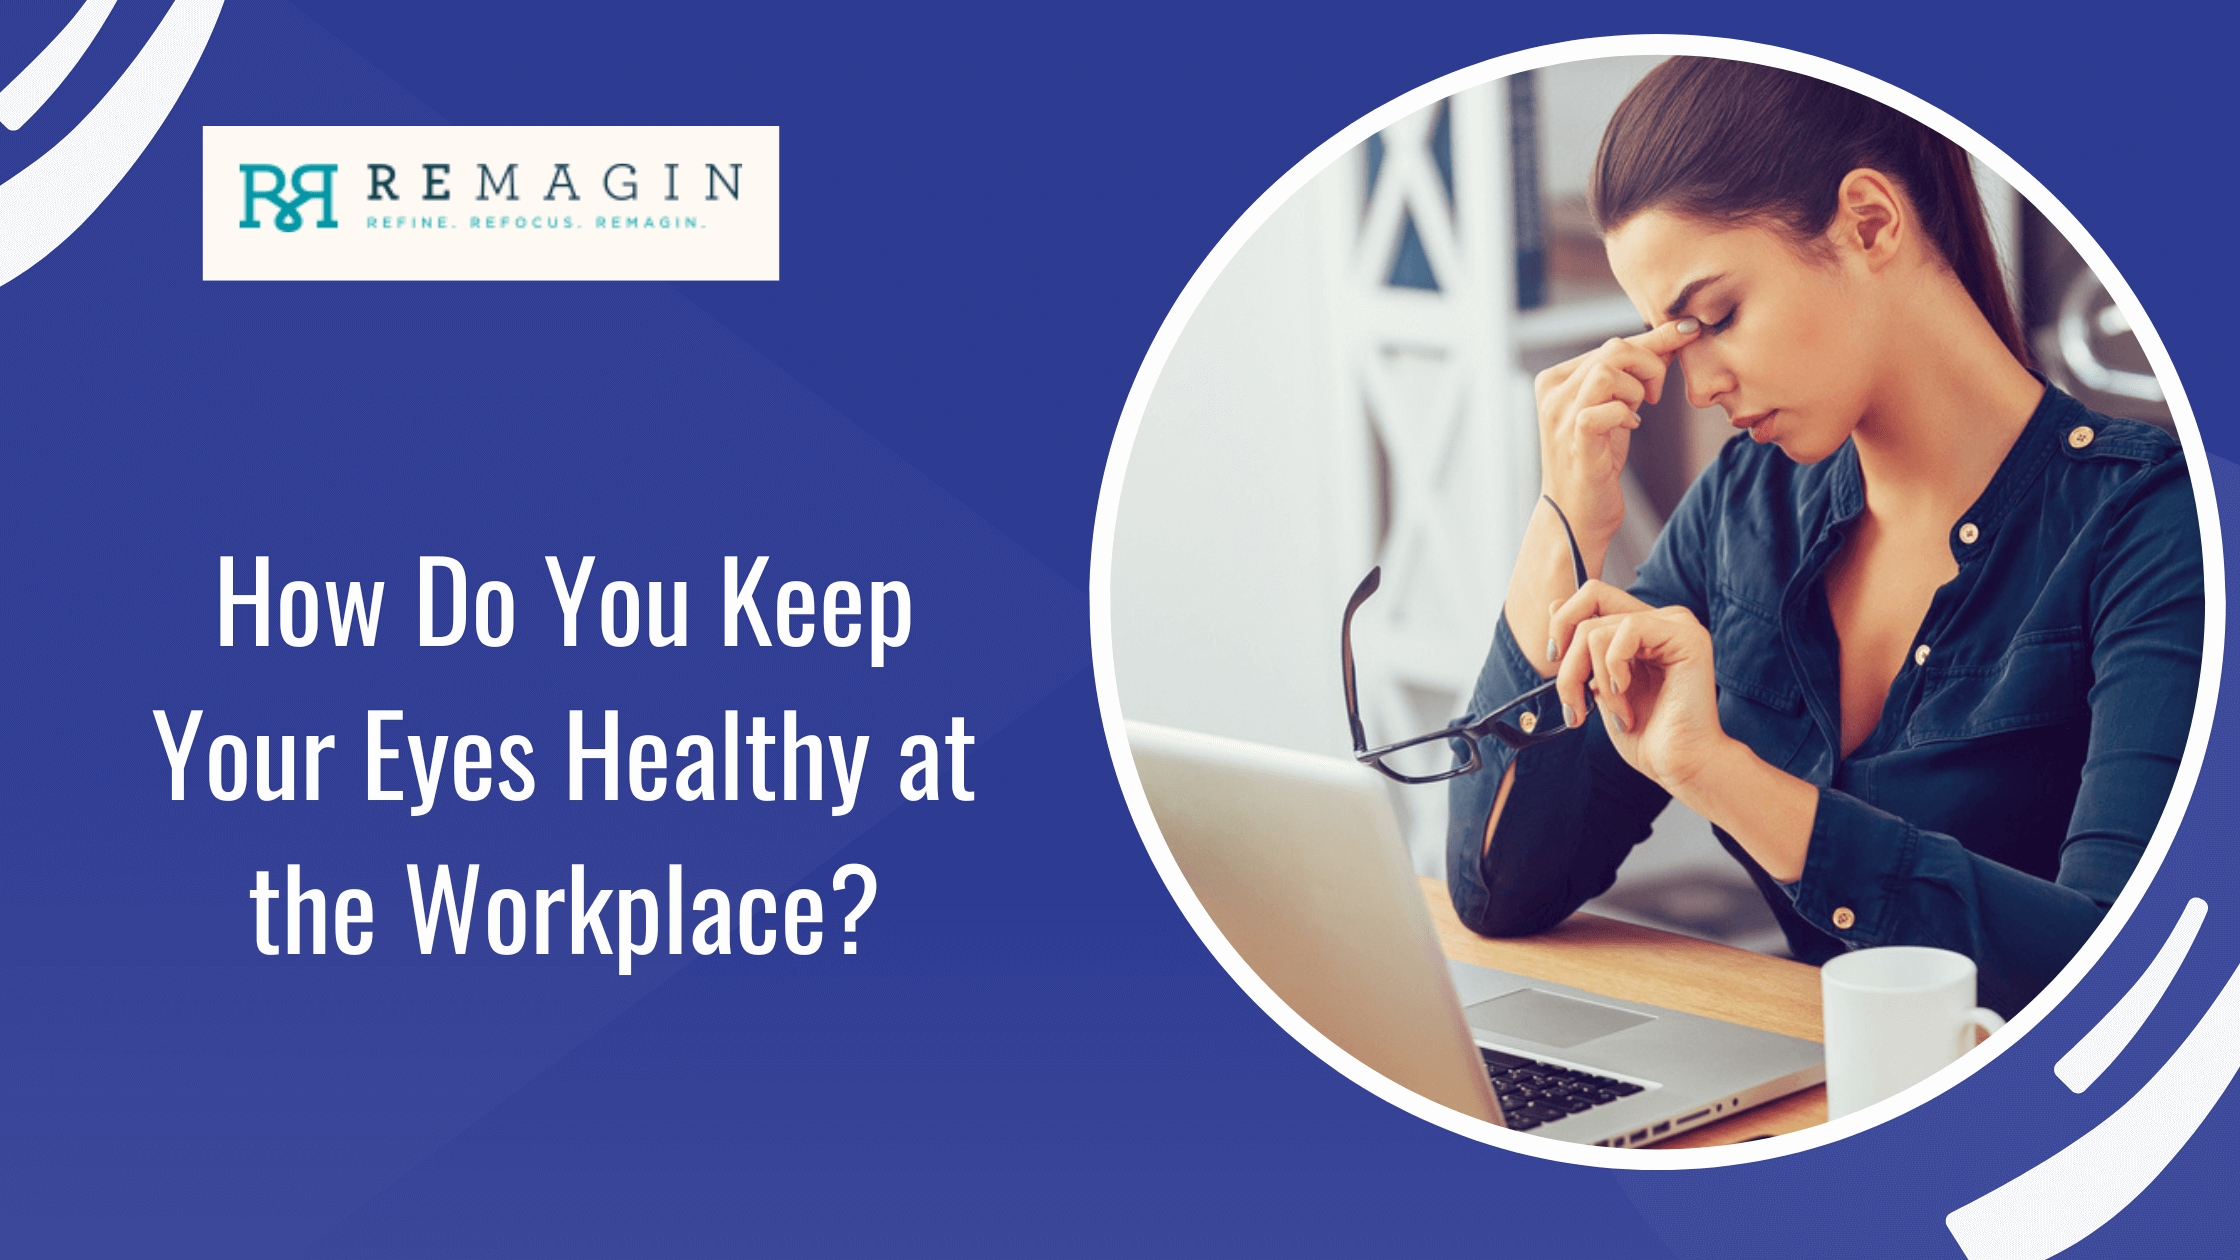 How Do You Keep Your Eyes Healthy at the Workplace?